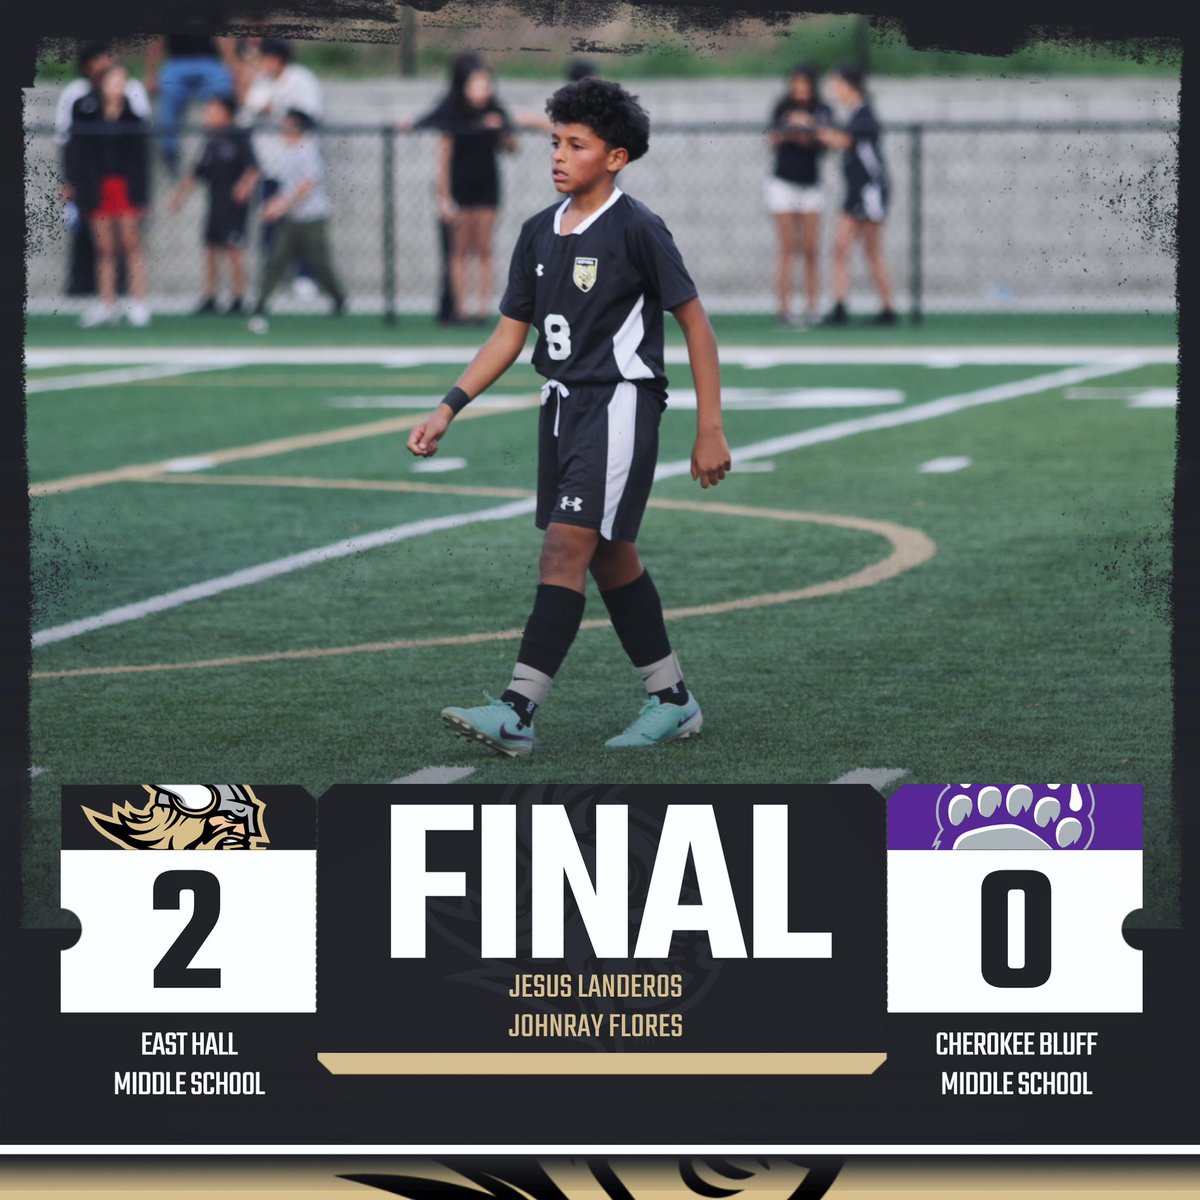 EHMS boys pick up another win against Cherokee Bluff yesterday 2-0. Jesus Landeros and Johnray Flores both scored in the win. They close out the regular season at home on Thursday against Chestatee. Let go Vikings!